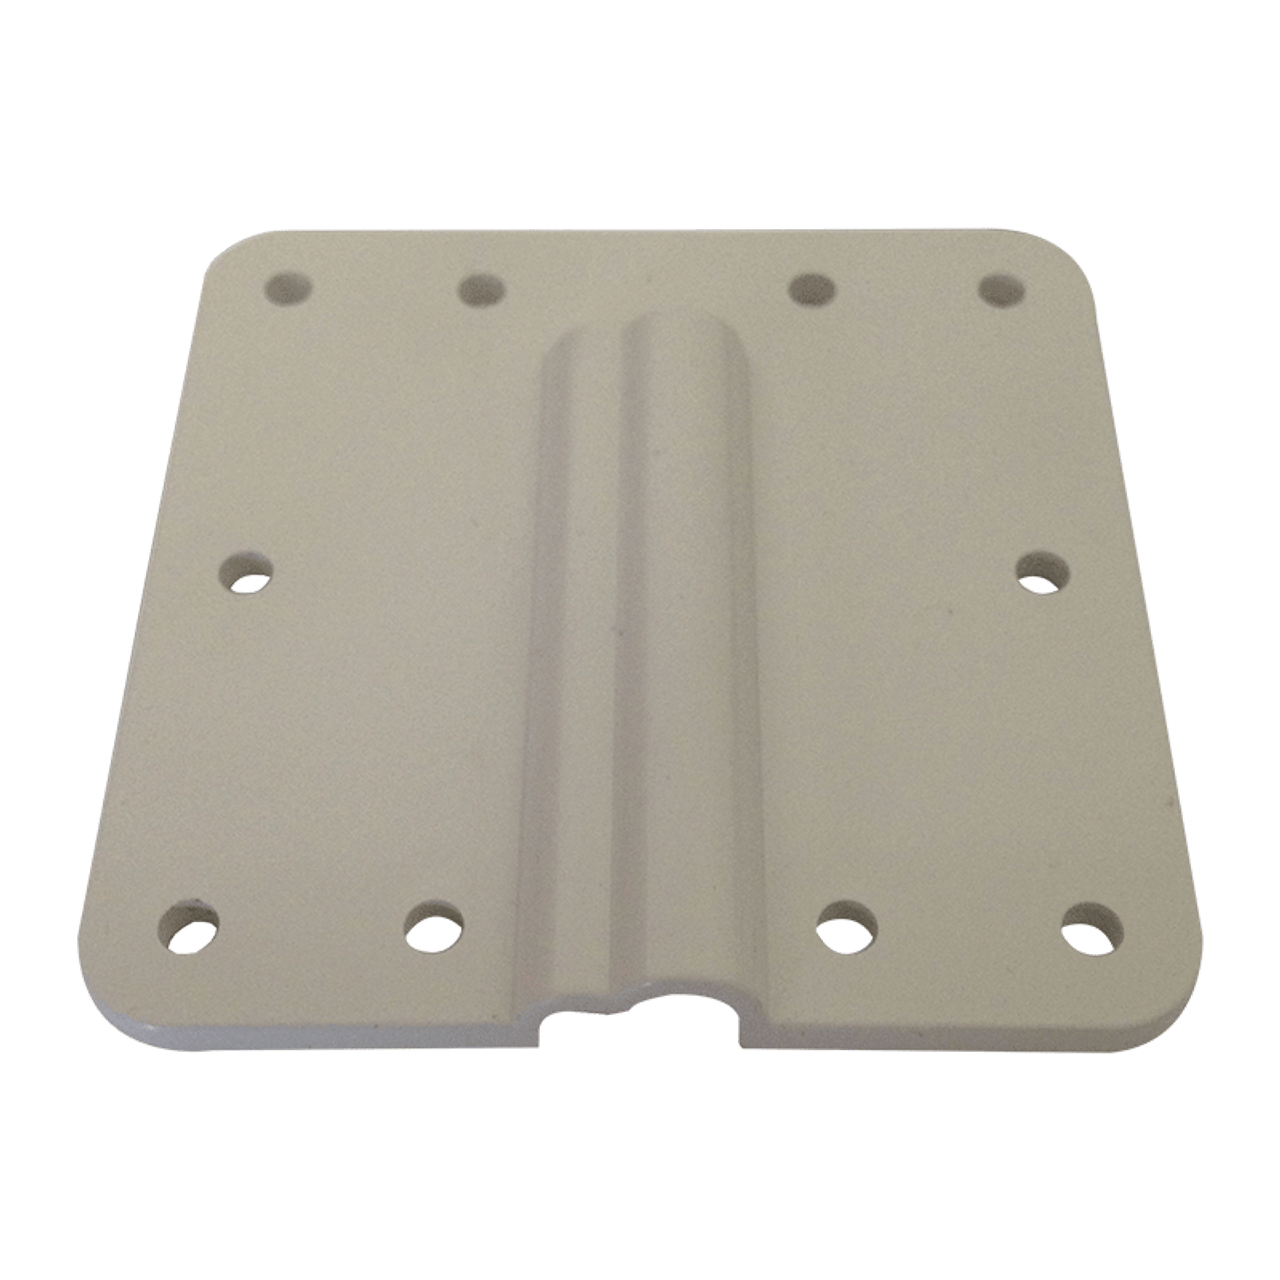 Winegard 2 Cable Entry Plate. Ce-2000 | 900-00394